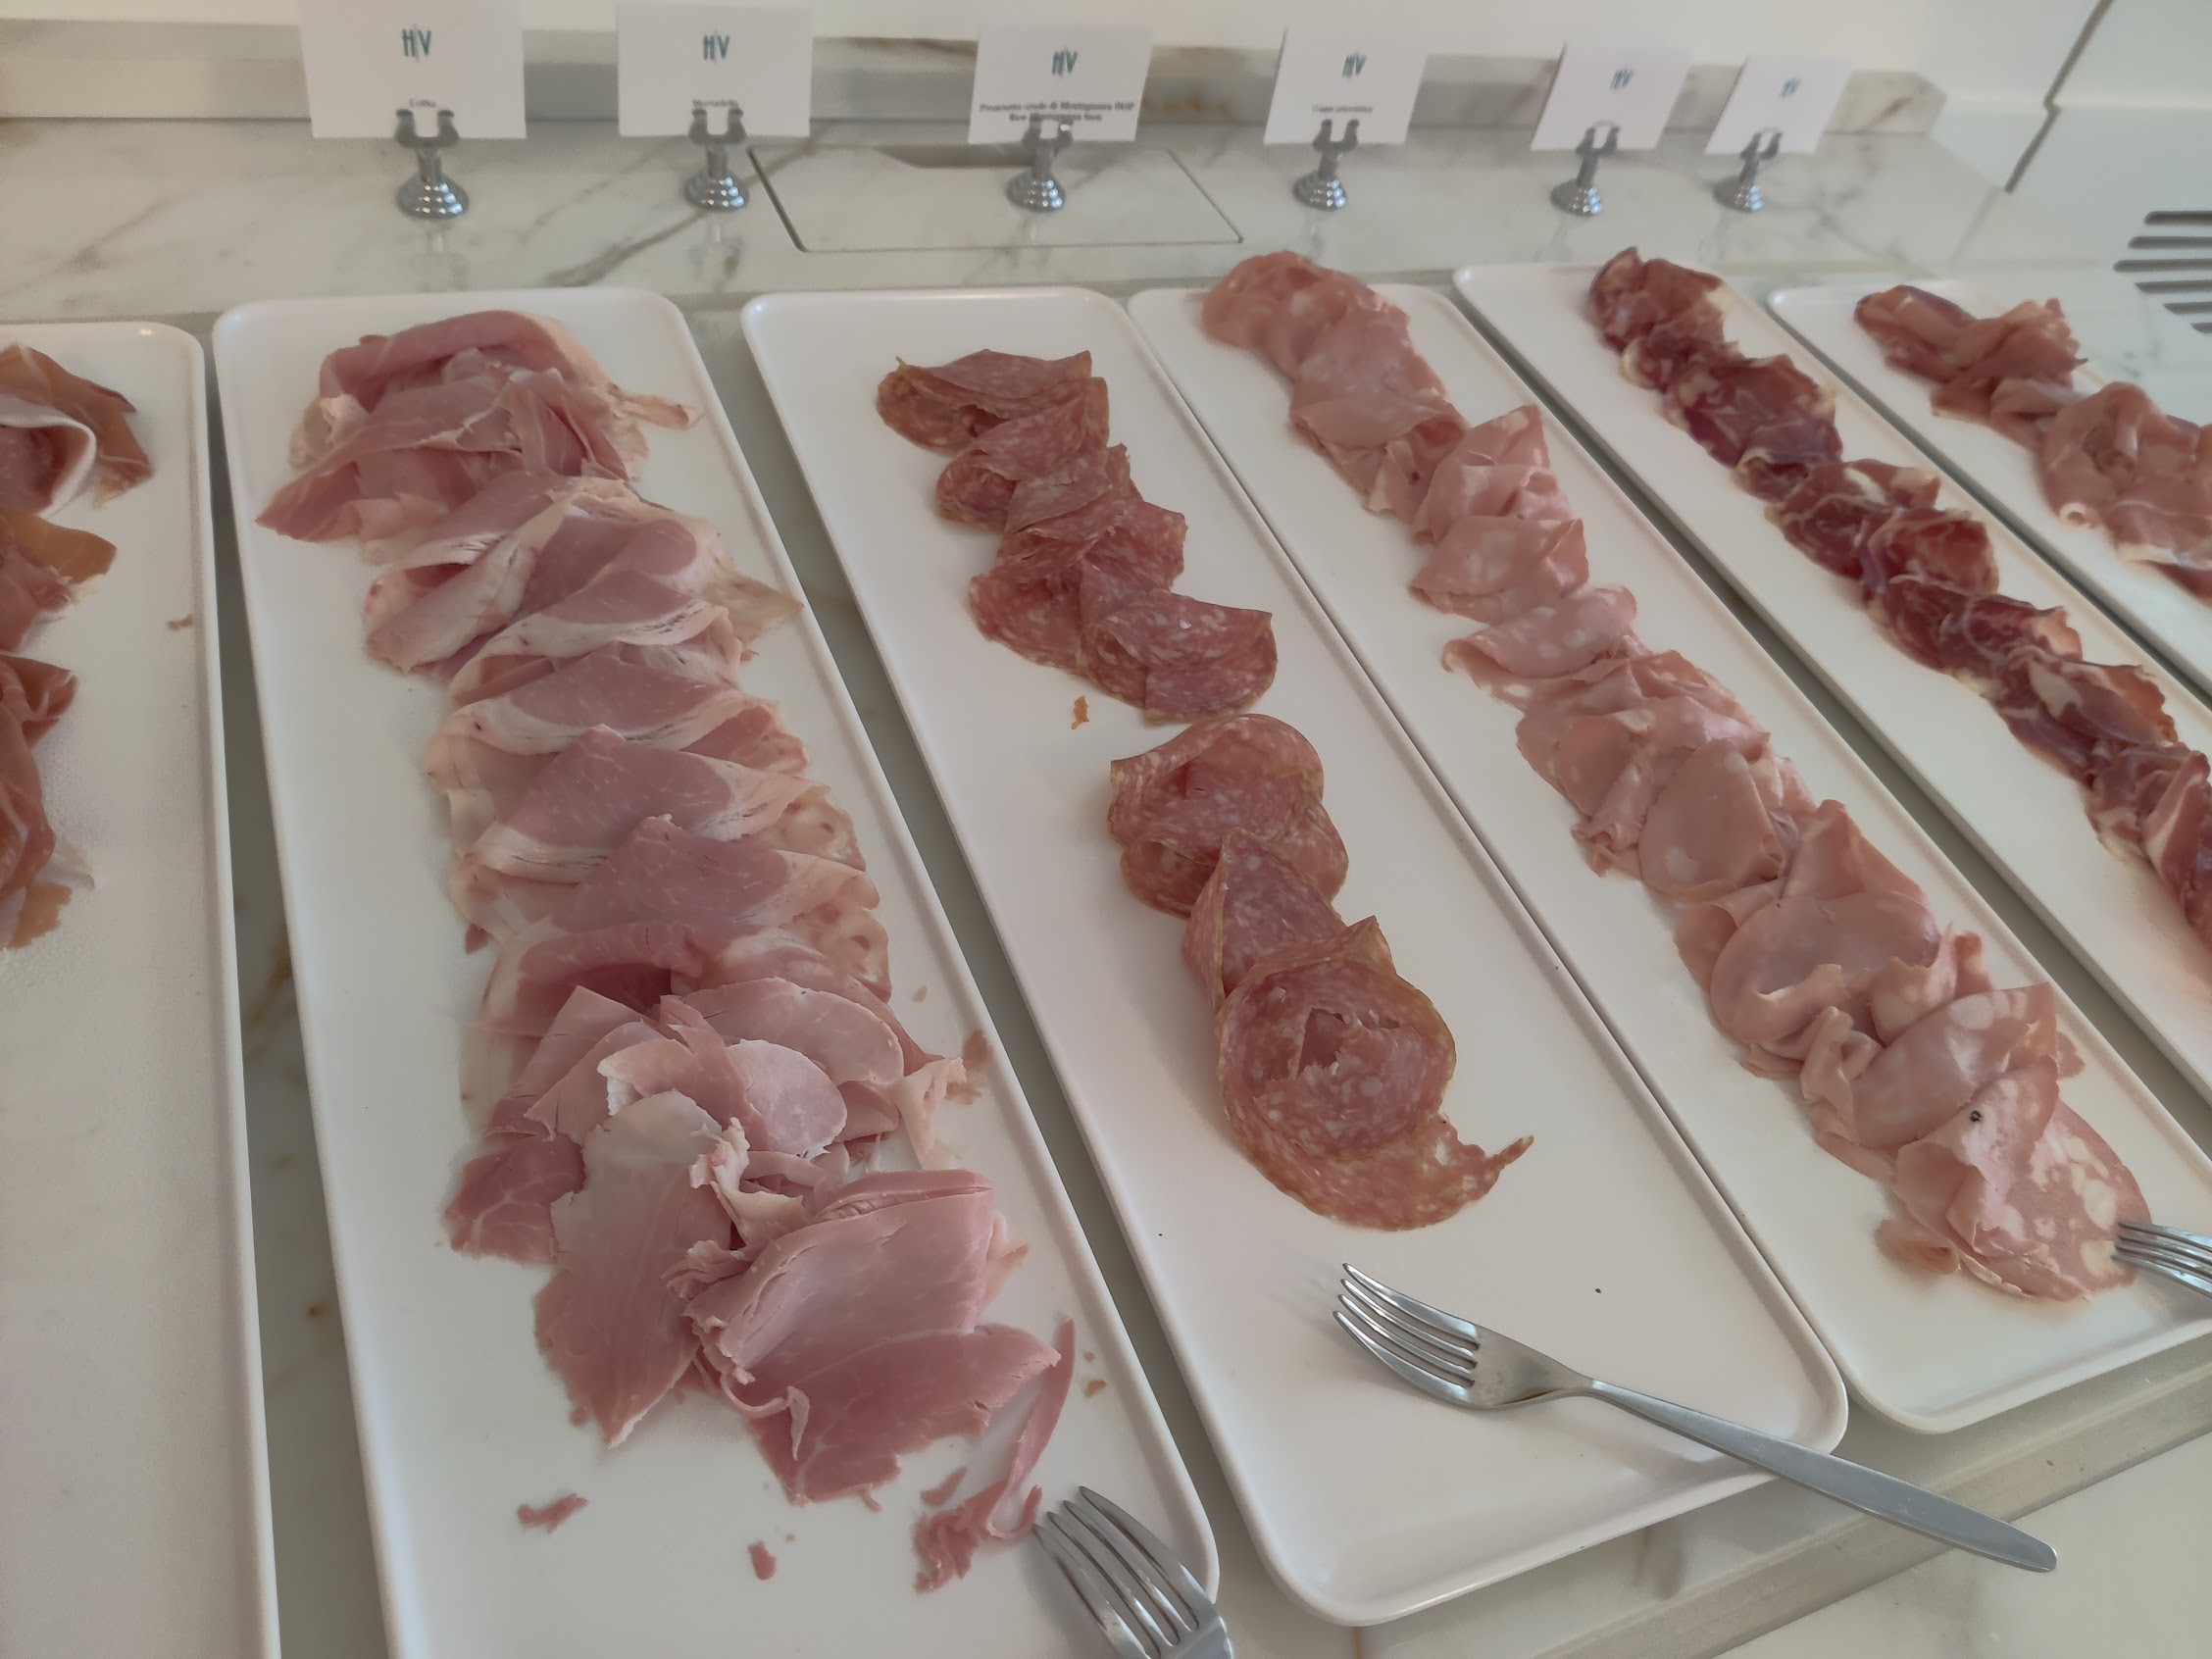 a row of different types of meat on white plates